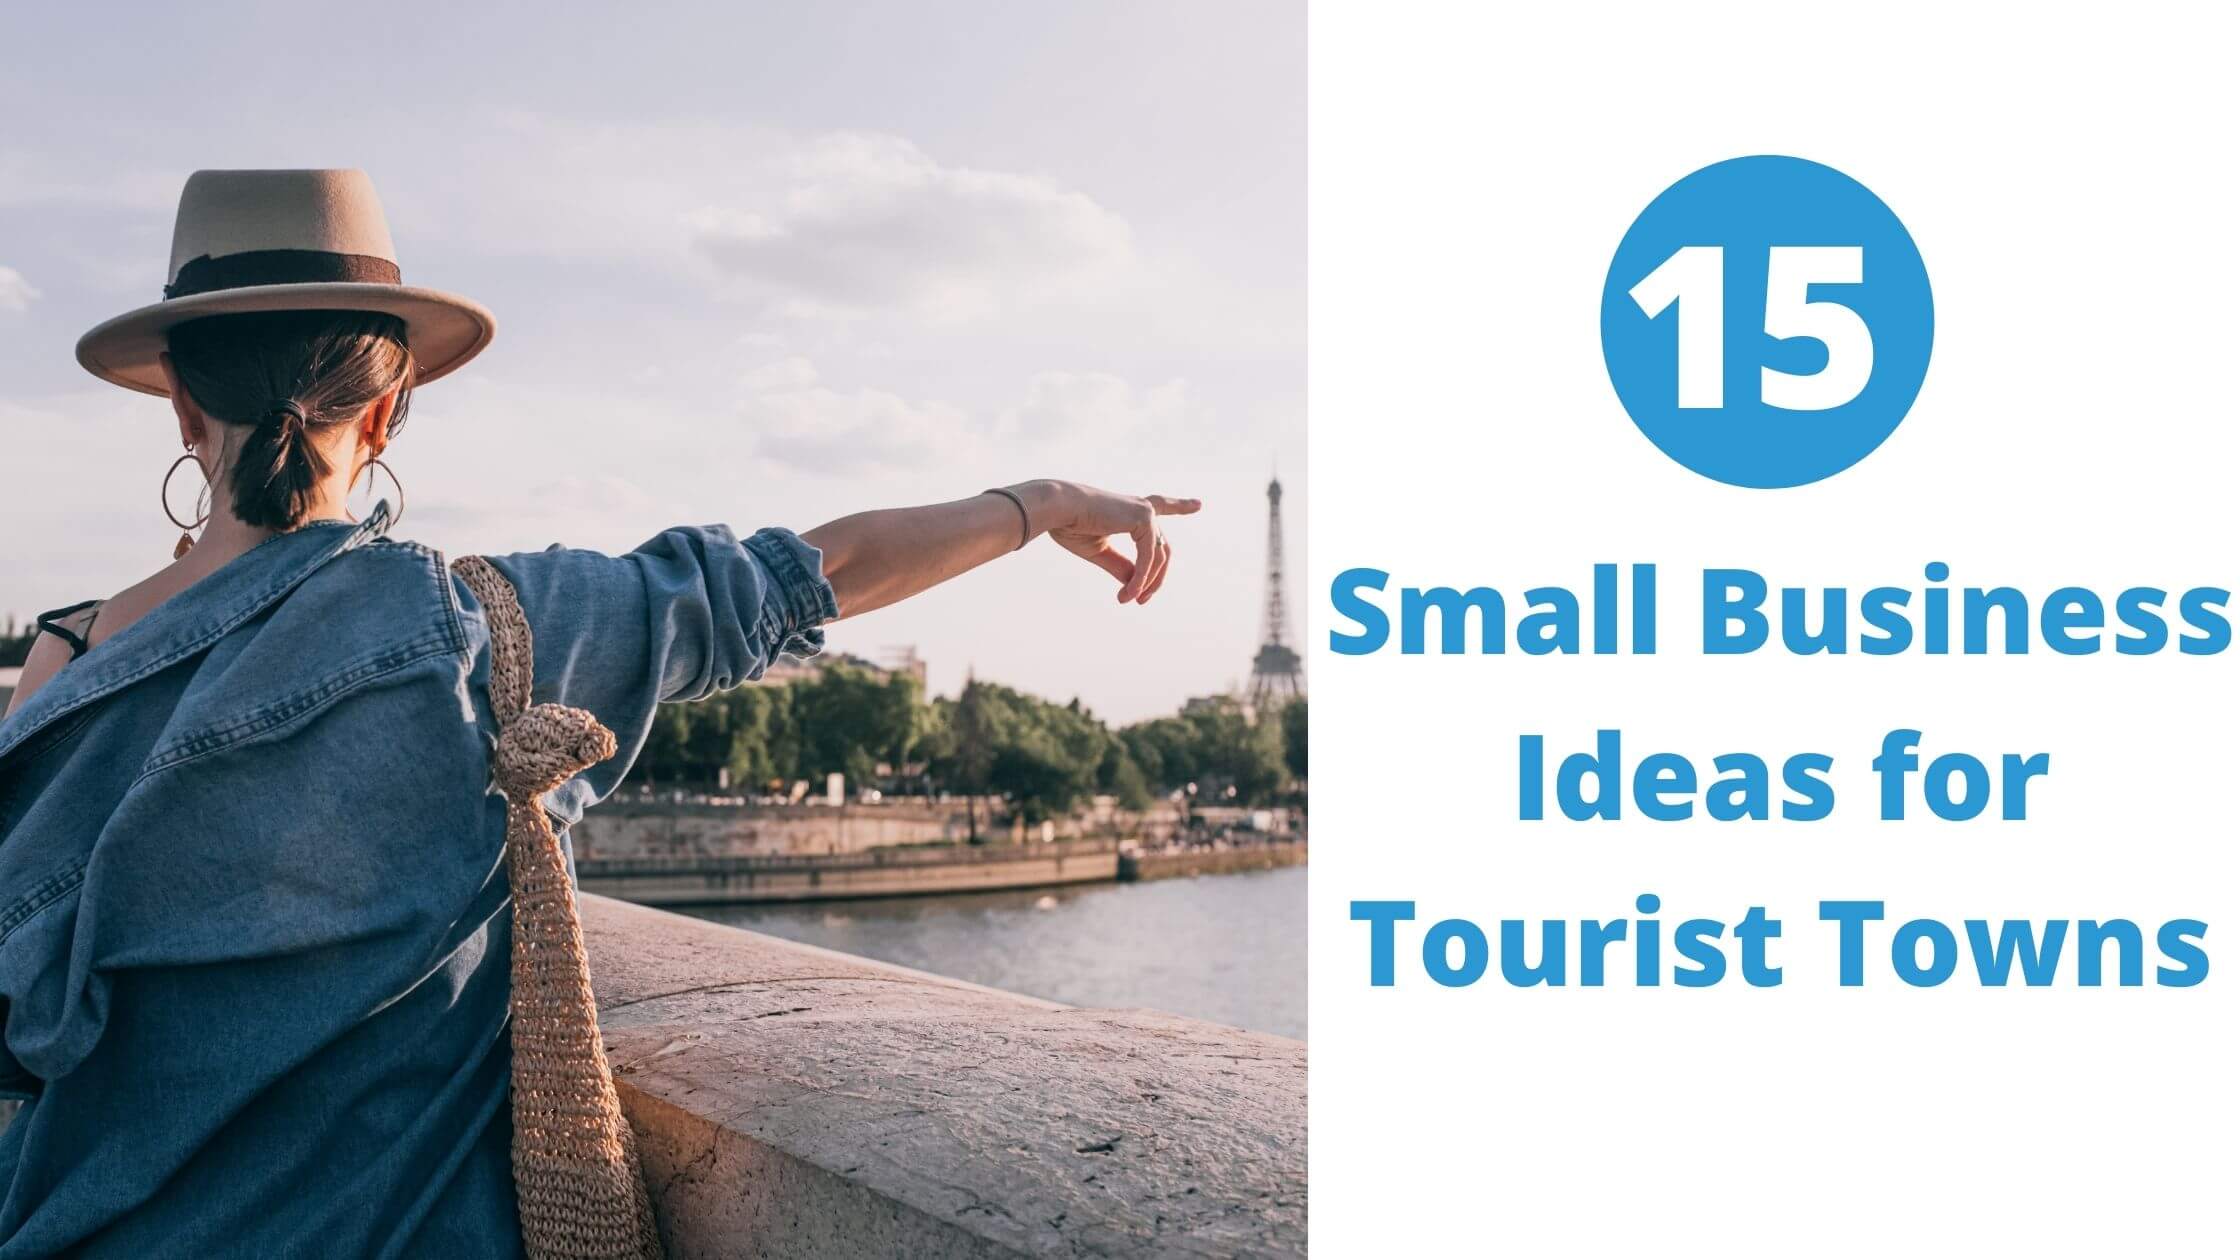 Small Business Ideas for Tourist Towns